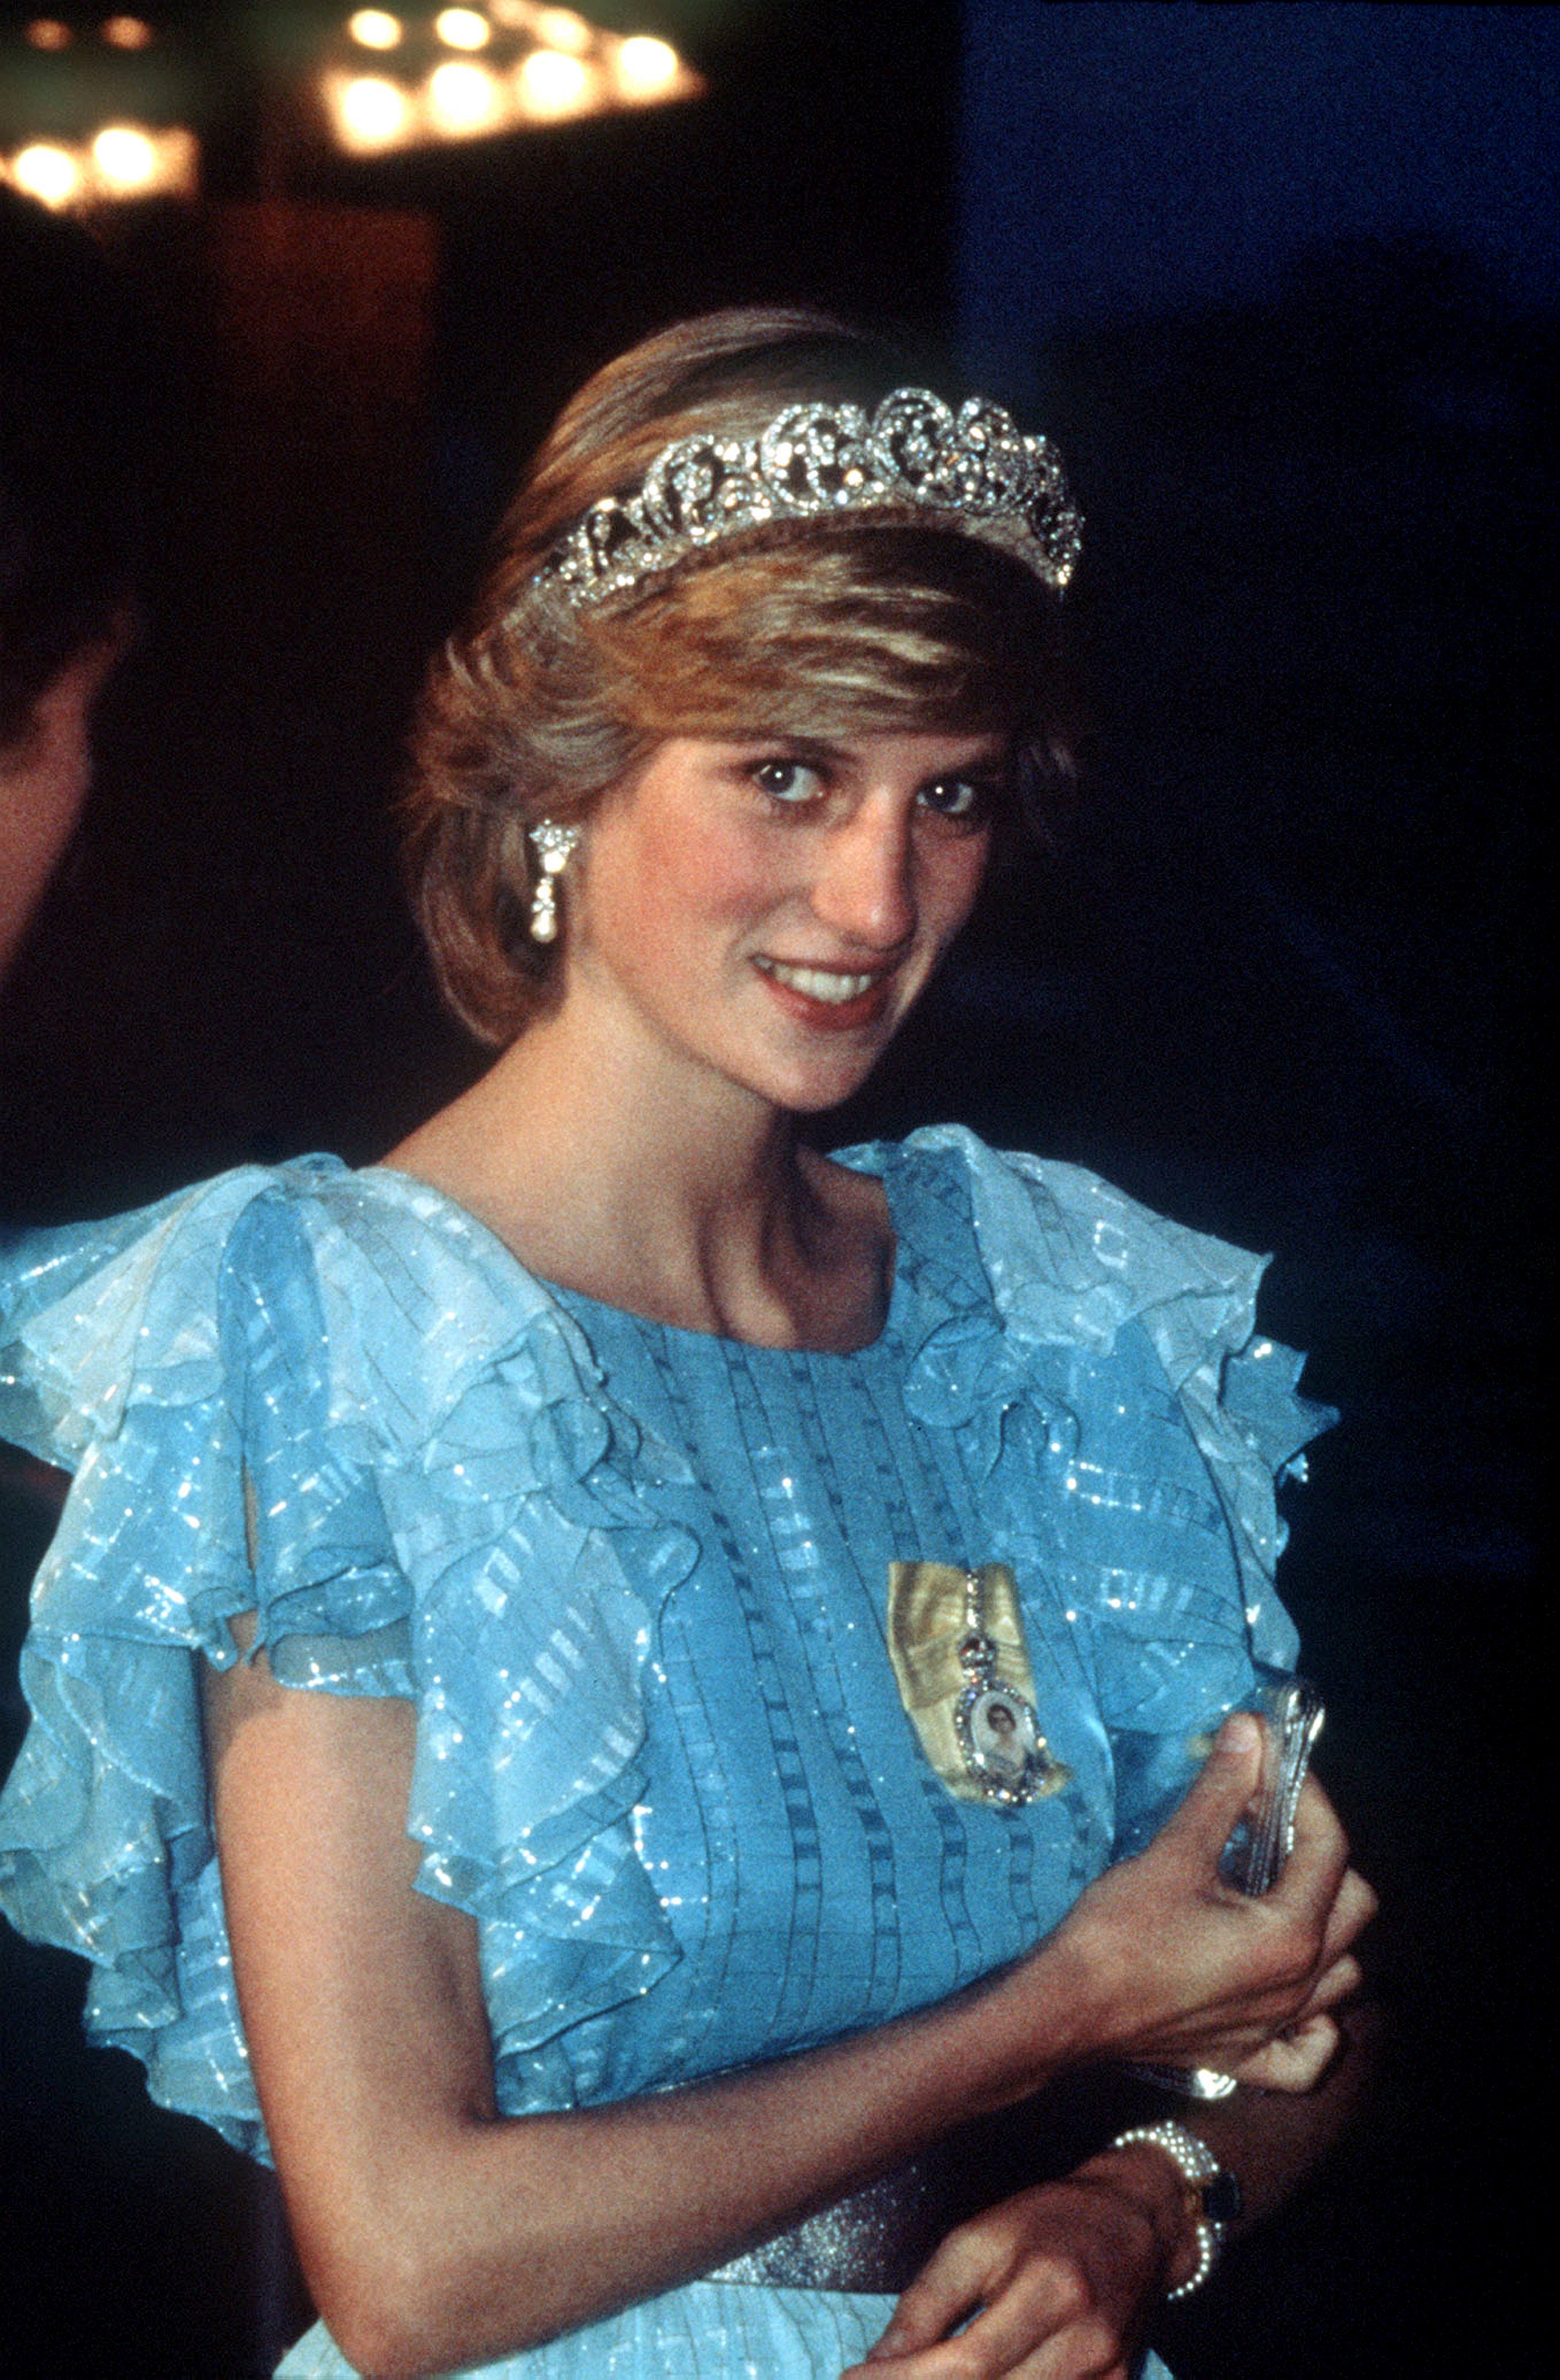 Diana, Princess of Wales, wearing the Spencer family tiara attending a state dinner during a tour to Canada in 1983 (PA)